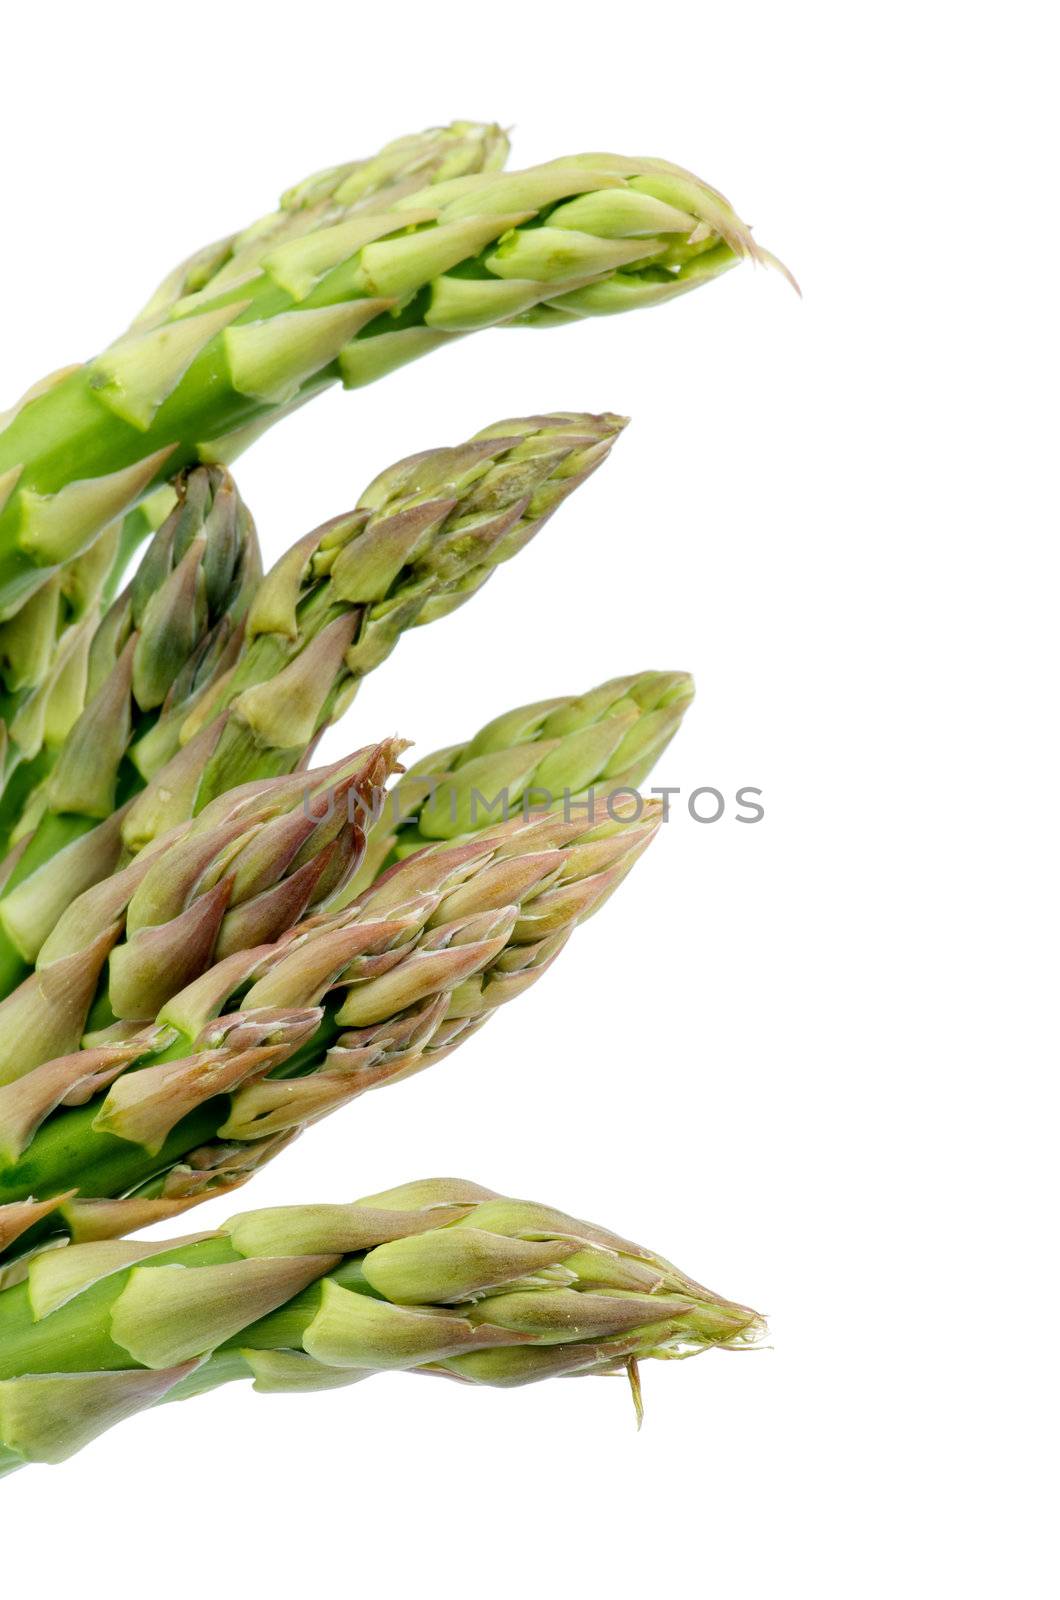 Green and Pink Asparagus Sprouts isolated on white background